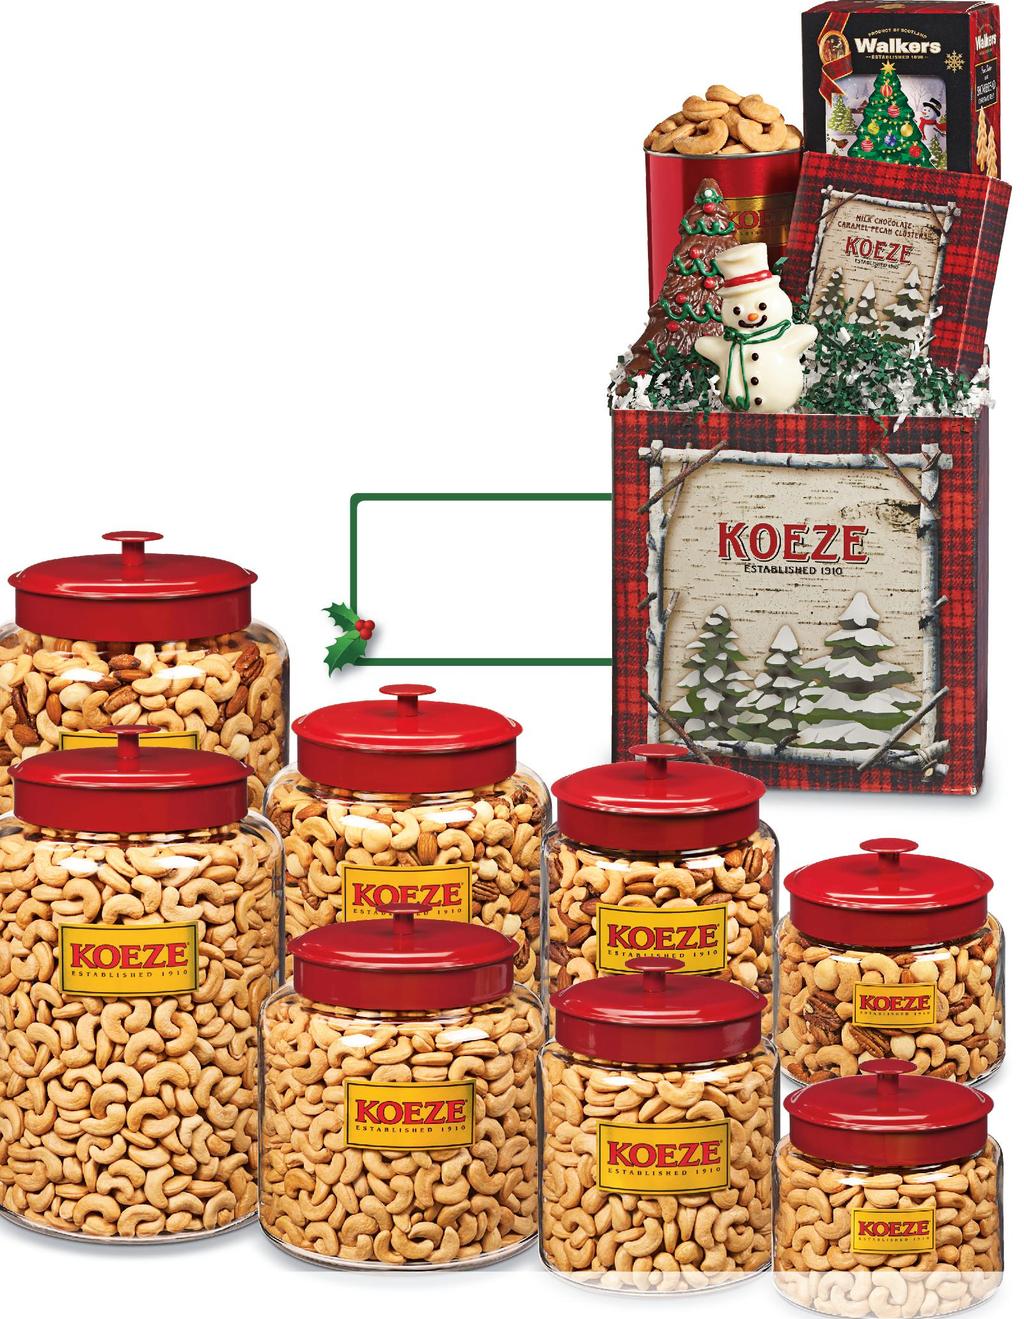 HUGE GLASS JARS OF MIXED NUTS WITH MACADAMIAS Get the holiday festivities rolling with a giant jar of Koeze s Mixed Nuts with Macadamias.